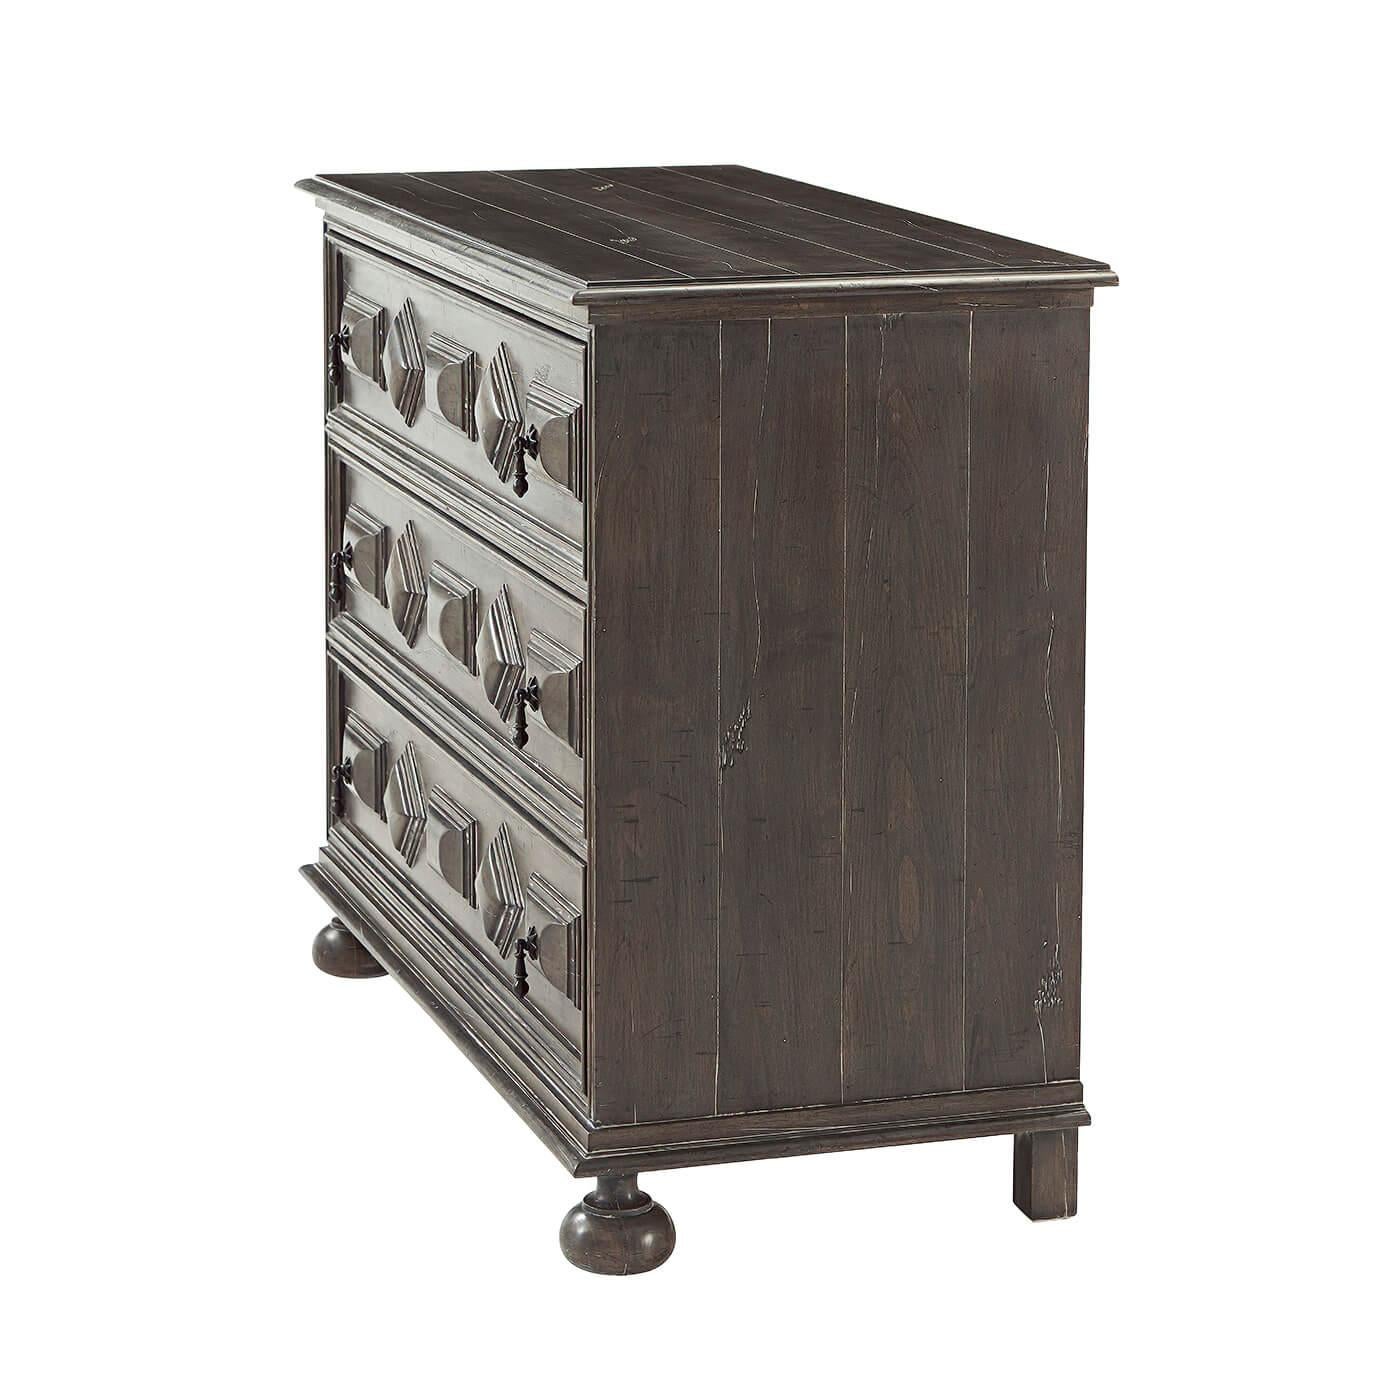 An early European style three drawer antiqued chest of drawers, with a planked molded edge top, three deep relief paneled drawers with brass drop handles and bunn feet.

Dimensions: 42